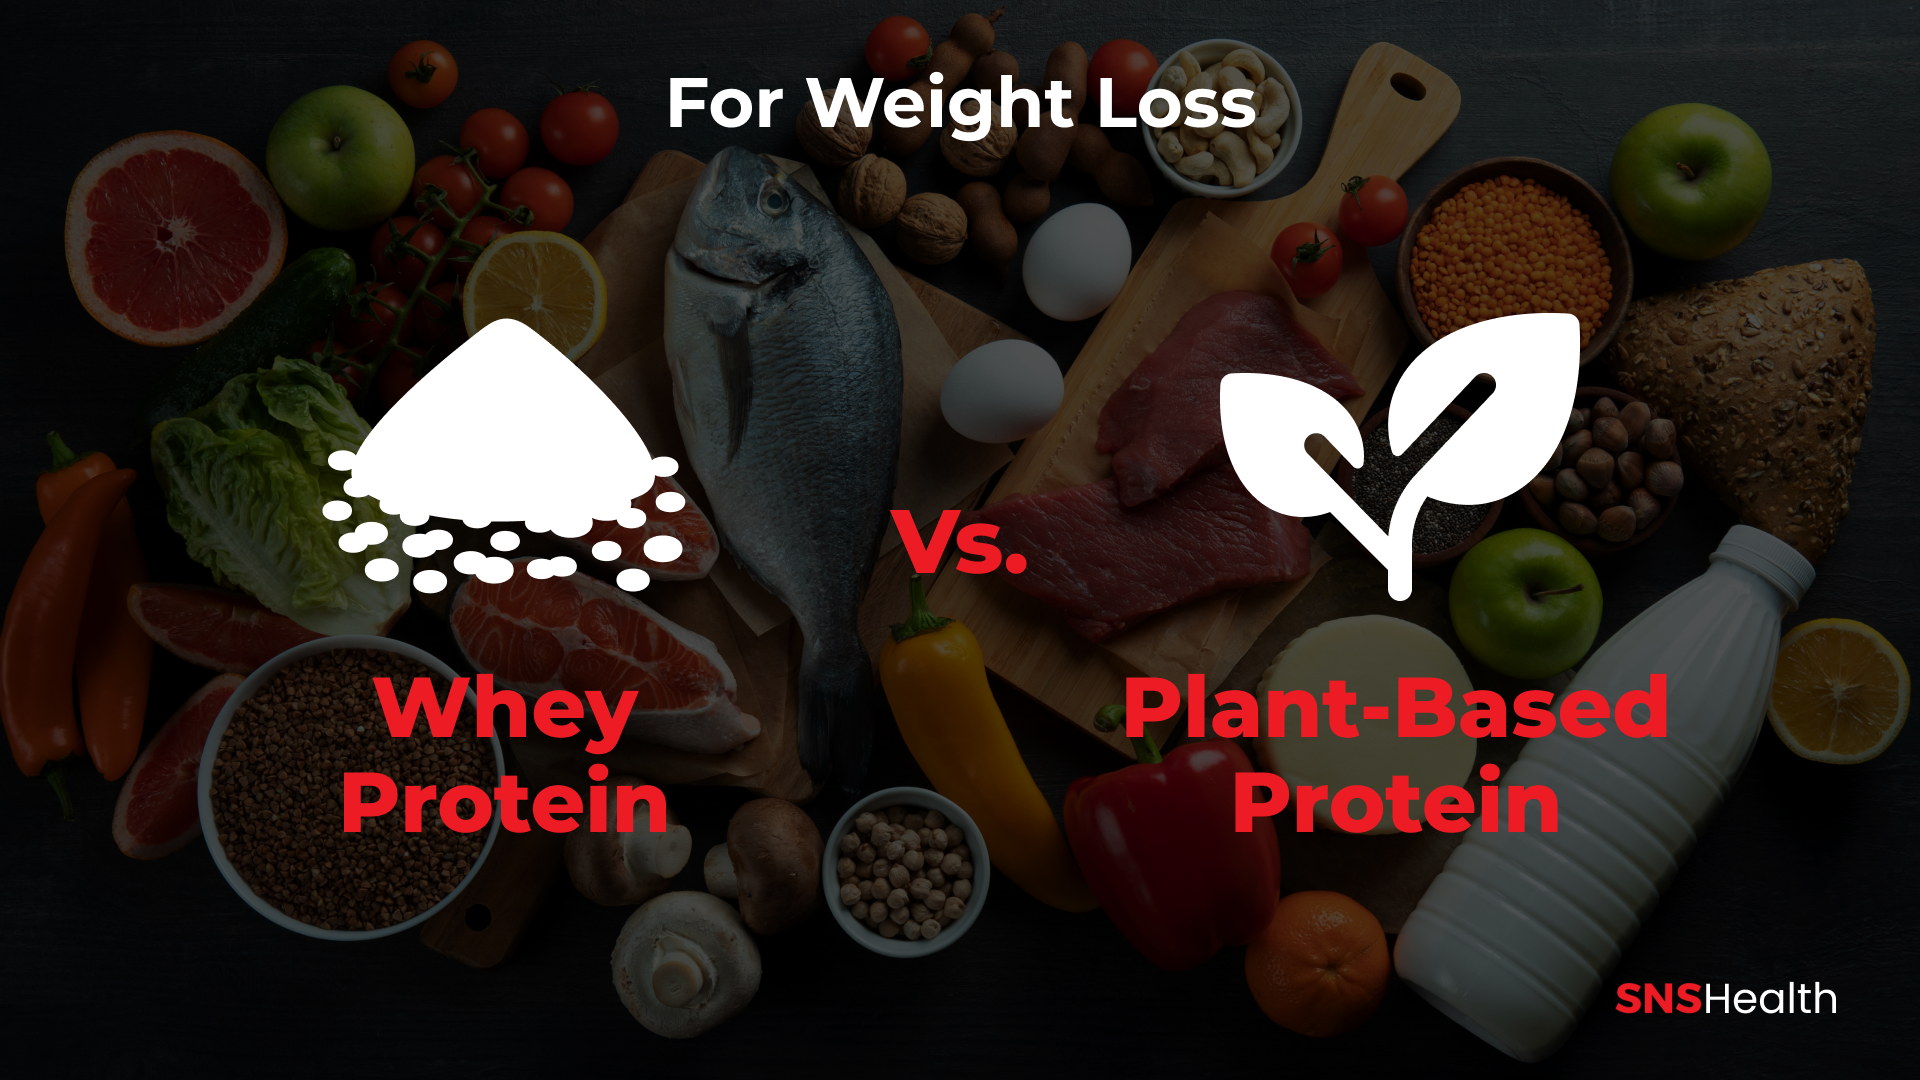 Whey Protein vs Plant-Based Protein - for weight loss